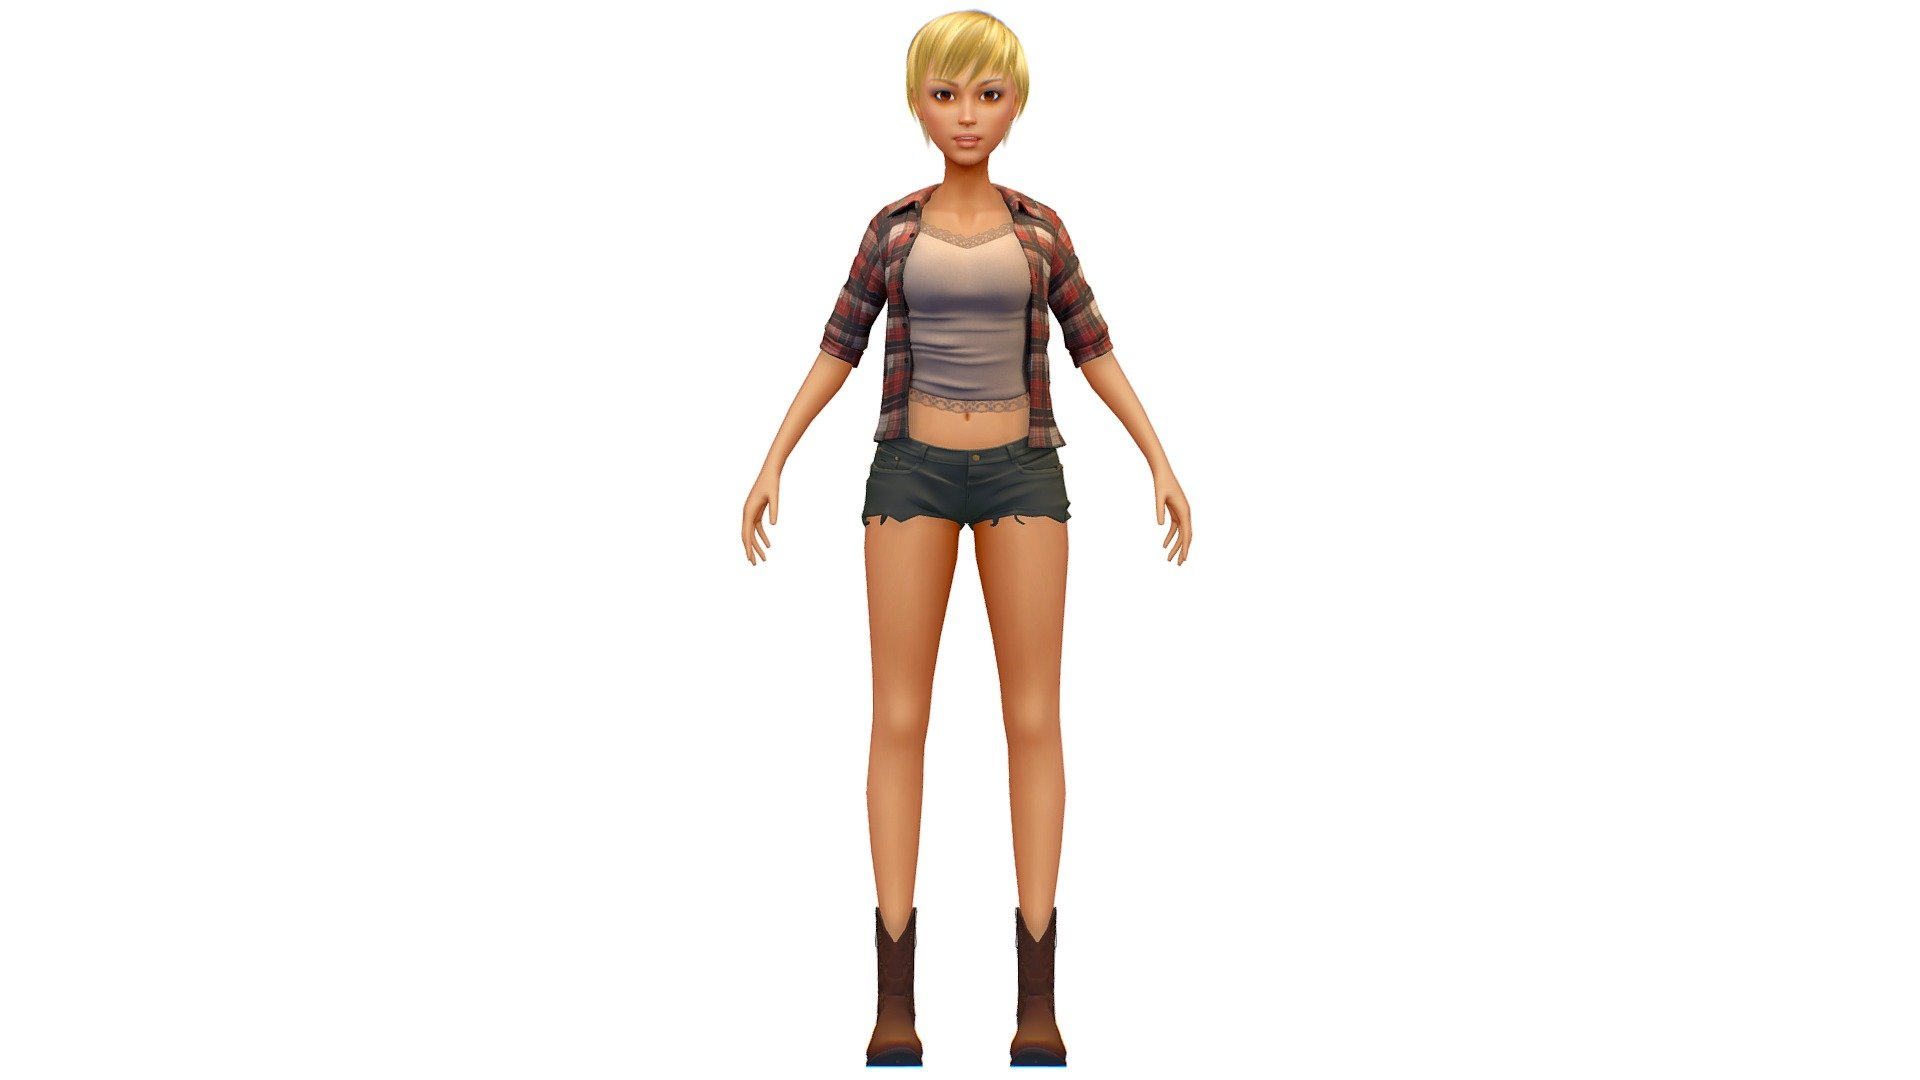 you can combine and match other combinations using the collection:

hair collection - https://skfb.ly/ovqTn

clotch collection - https://skfb.ly/ovqT7

lowpoly avatar collection - https://skfb.ly/ovqTu - Cartoon High Poly Subdivision Cowgirl Short - Buy Royalty Free 3D model by Oleg Shuldiakov (@olegshuldiakov) 3d model